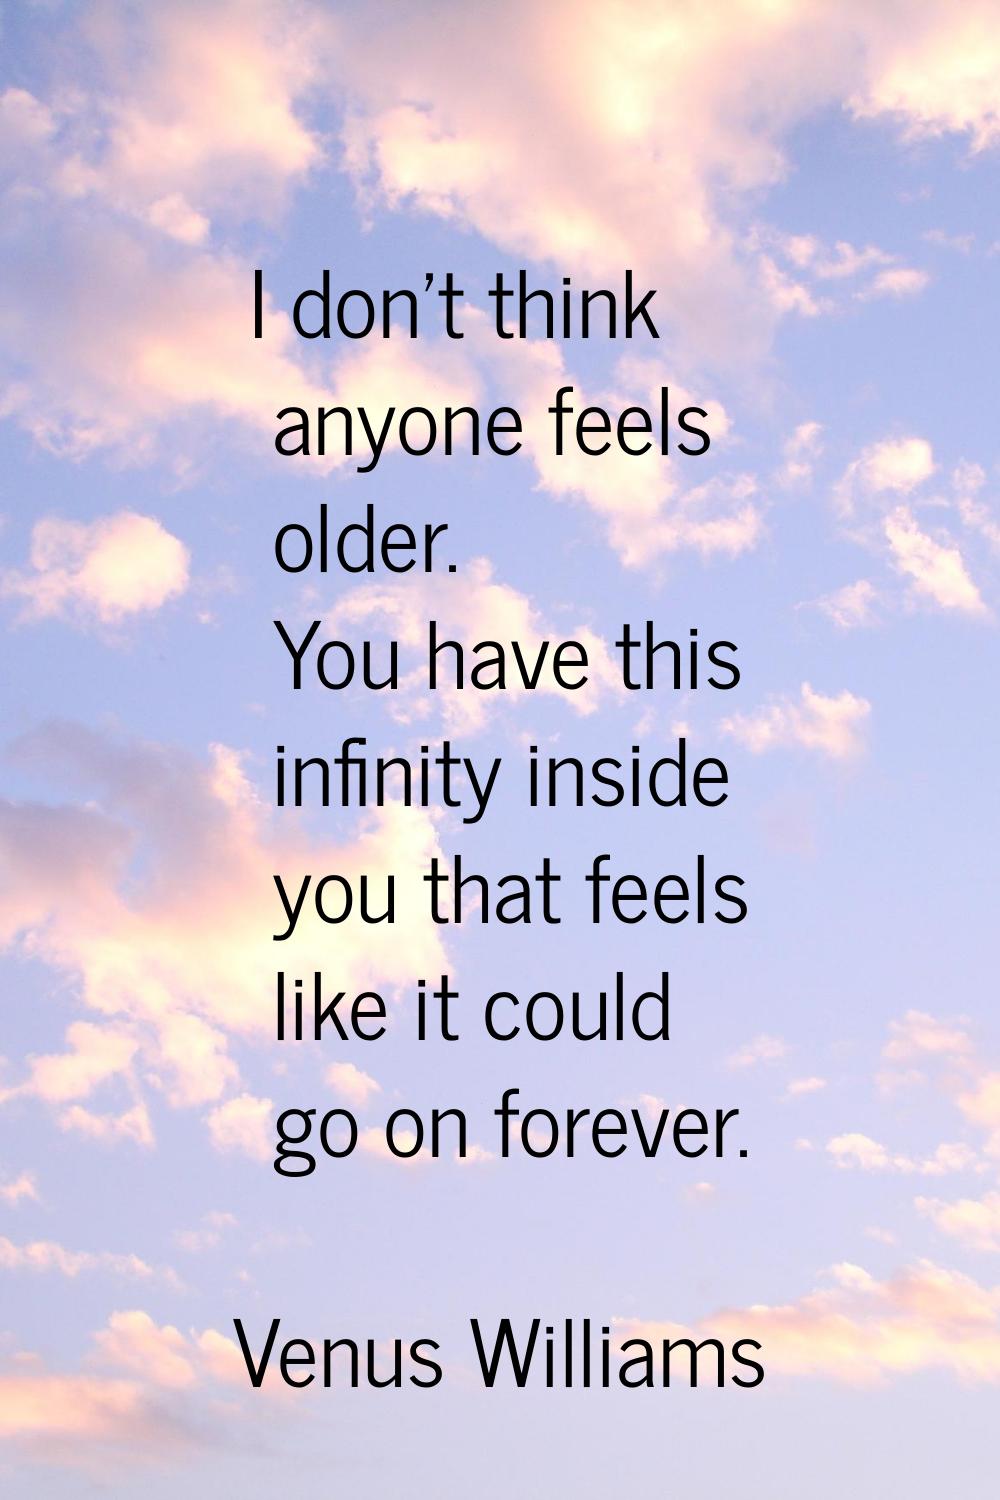 I don't think anyone feels older. You have this infinity inside you that feels like it could go on 